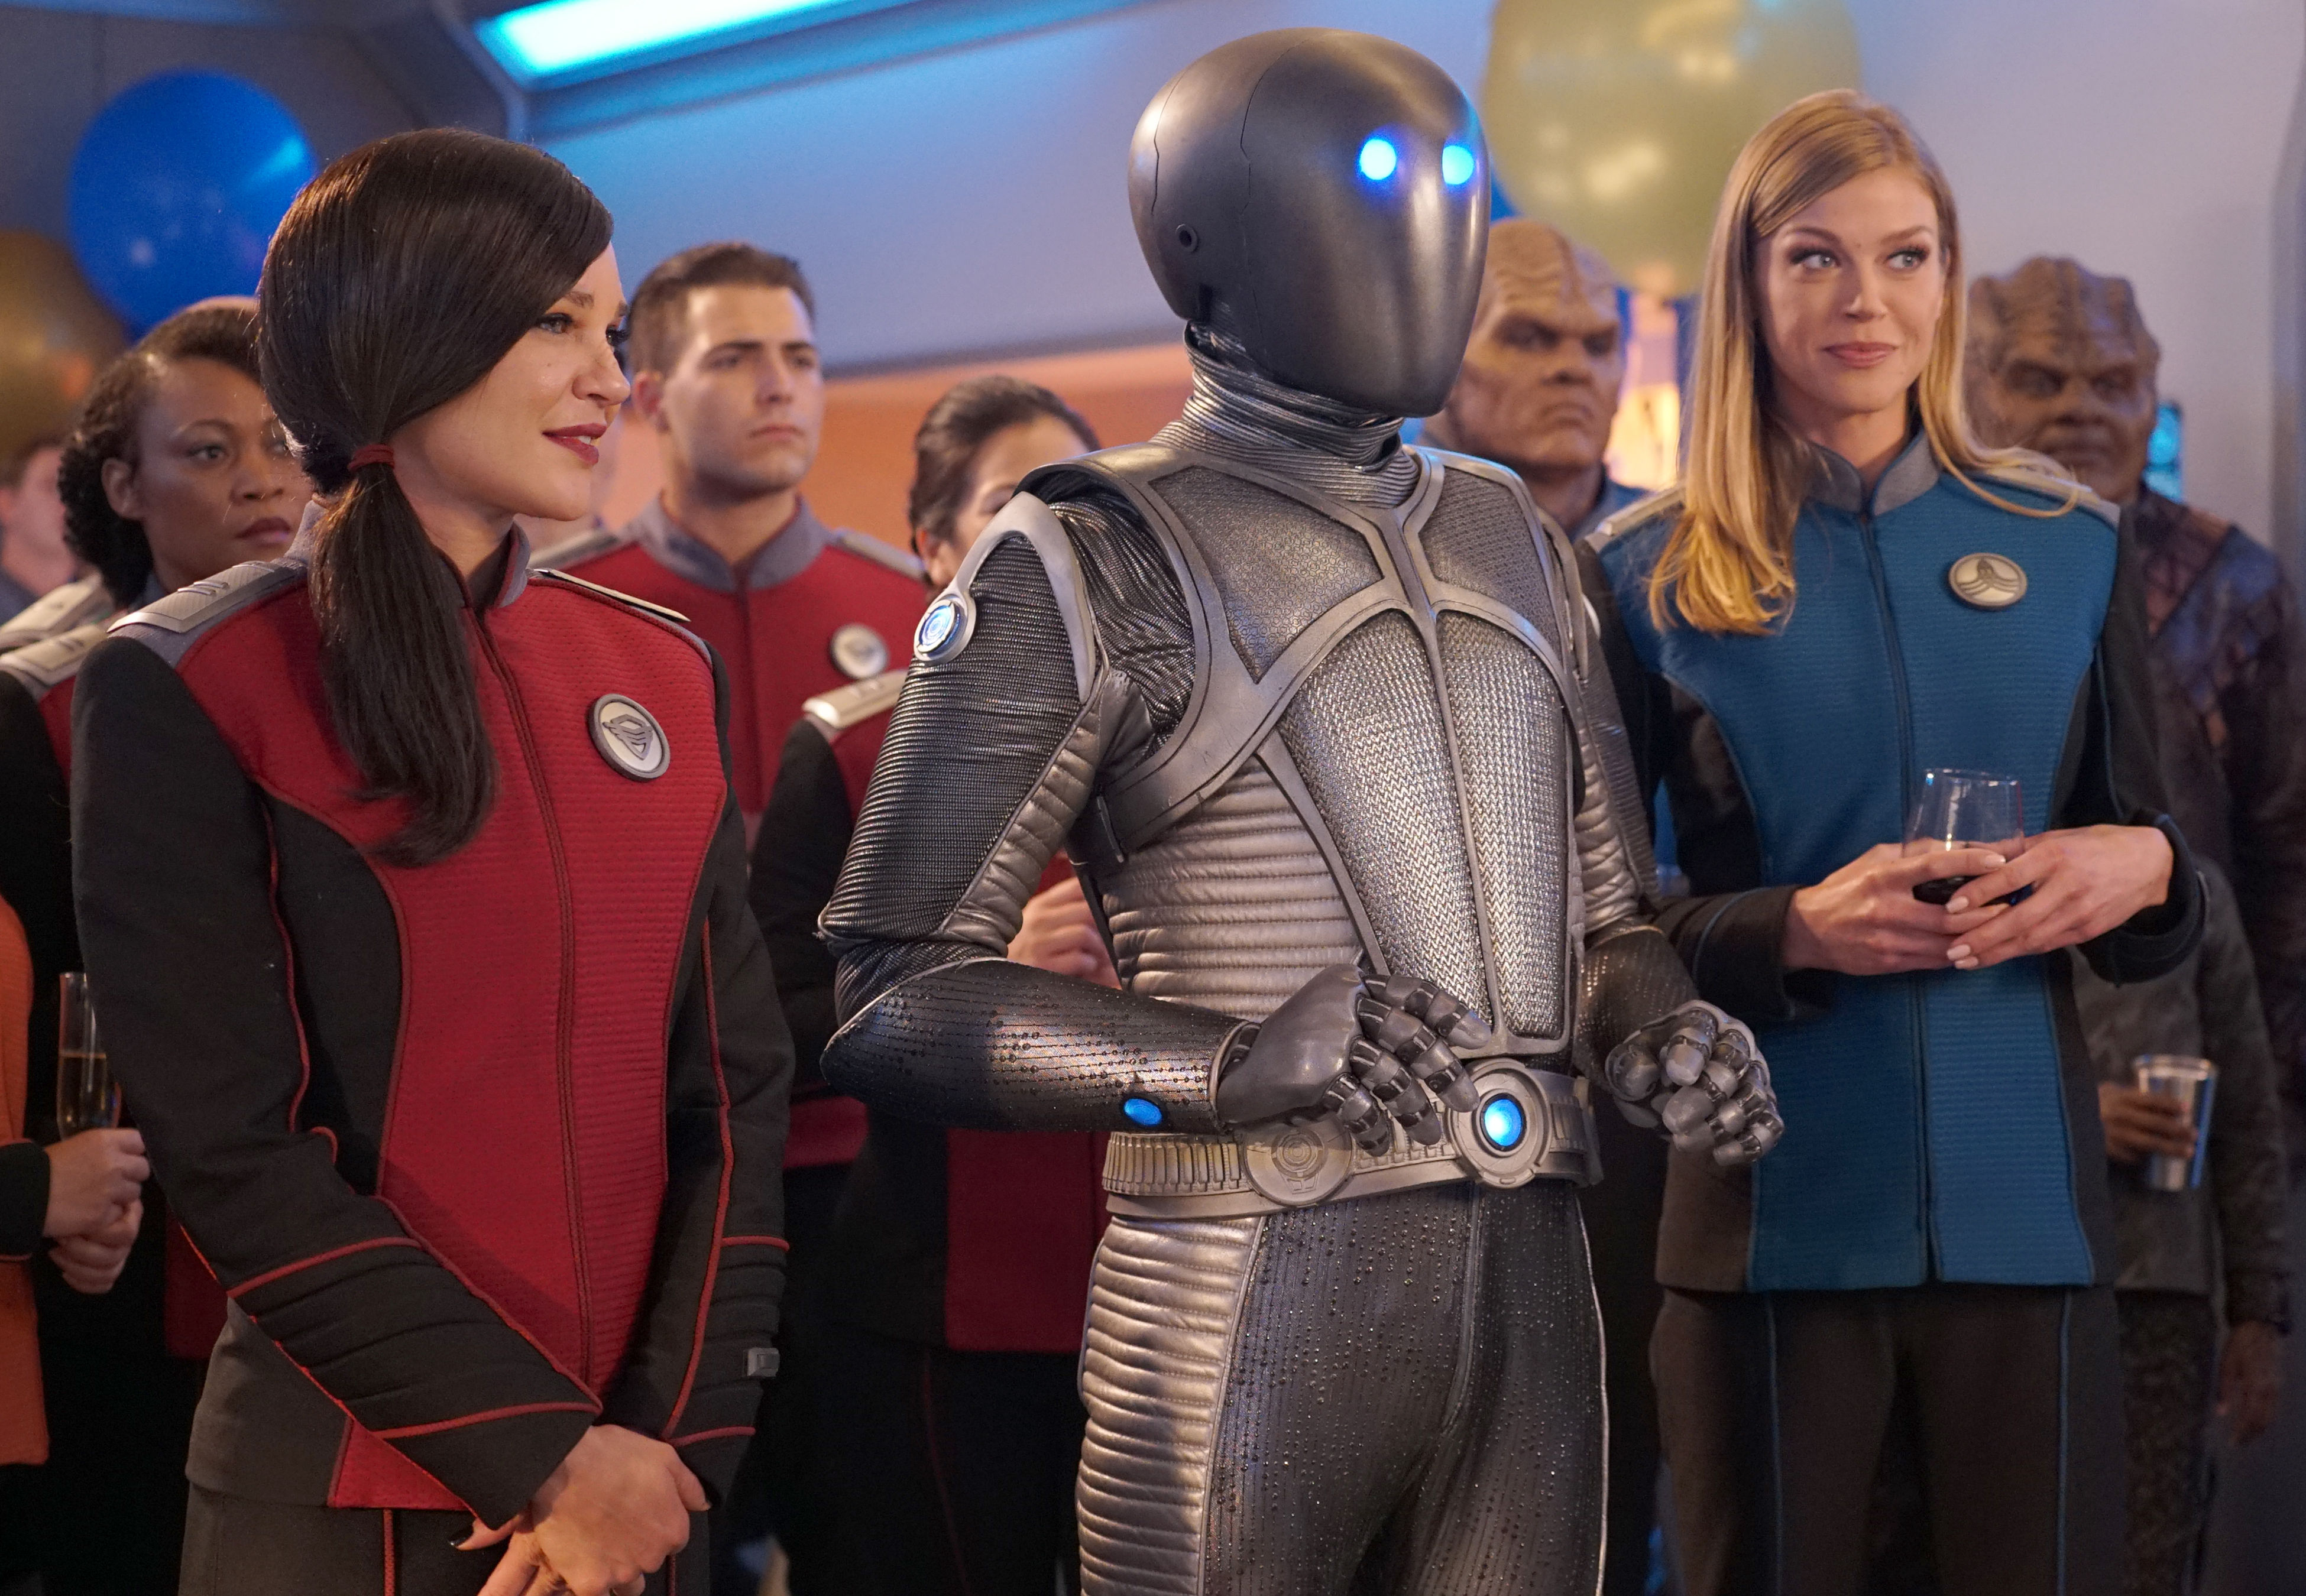 The Orville season premiere explores the aftermath of Isaac's big